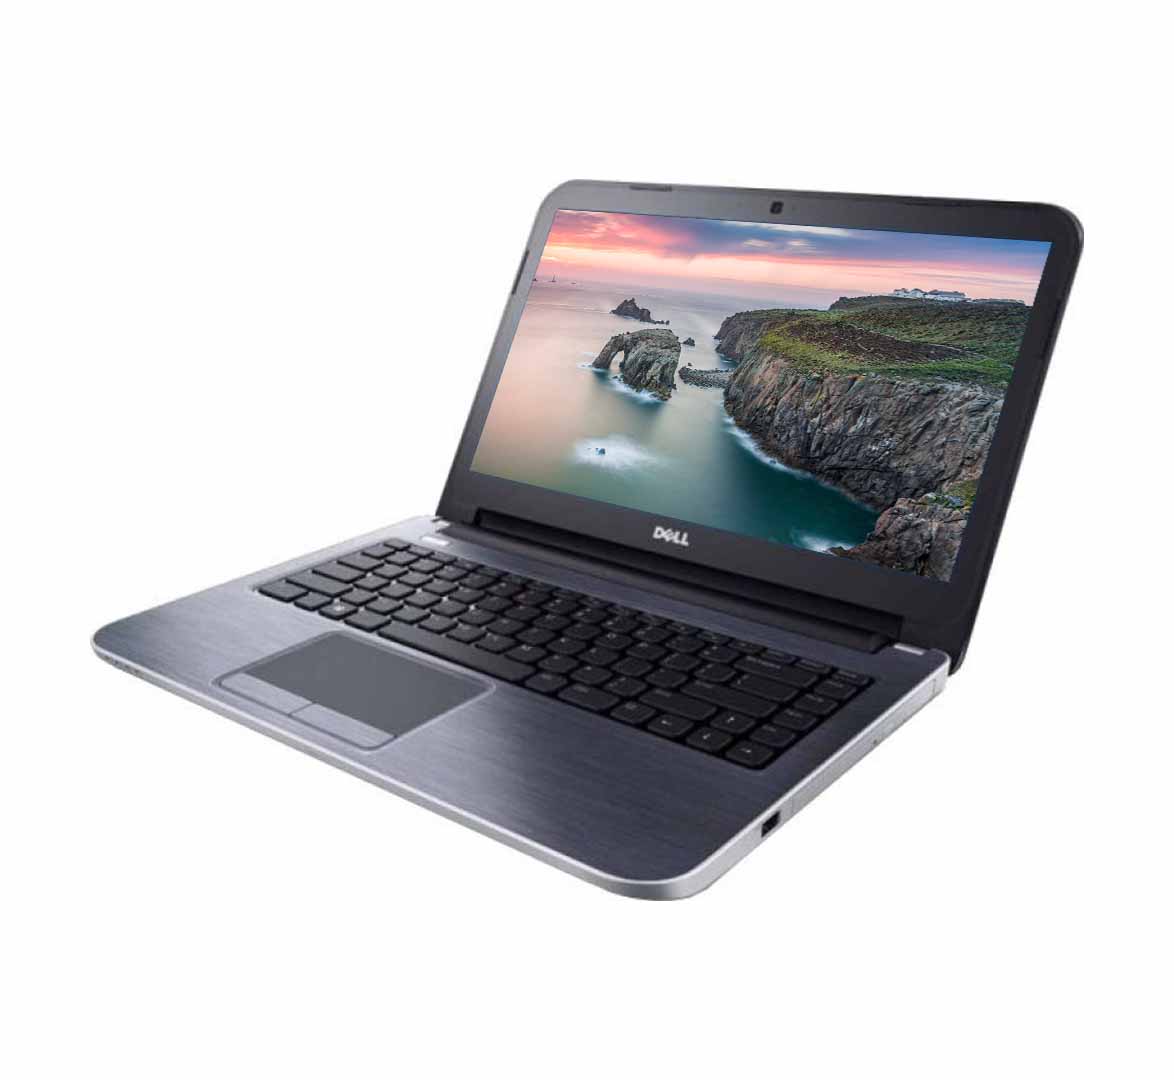 Dell Inspiron 5421 Business Laptop, Intel Core i5-3rd Generation CPU, 4GB RAM, 320GB HDD, 14 inch Touchscreen, Windows 10 Pro, Refurbished Laptop